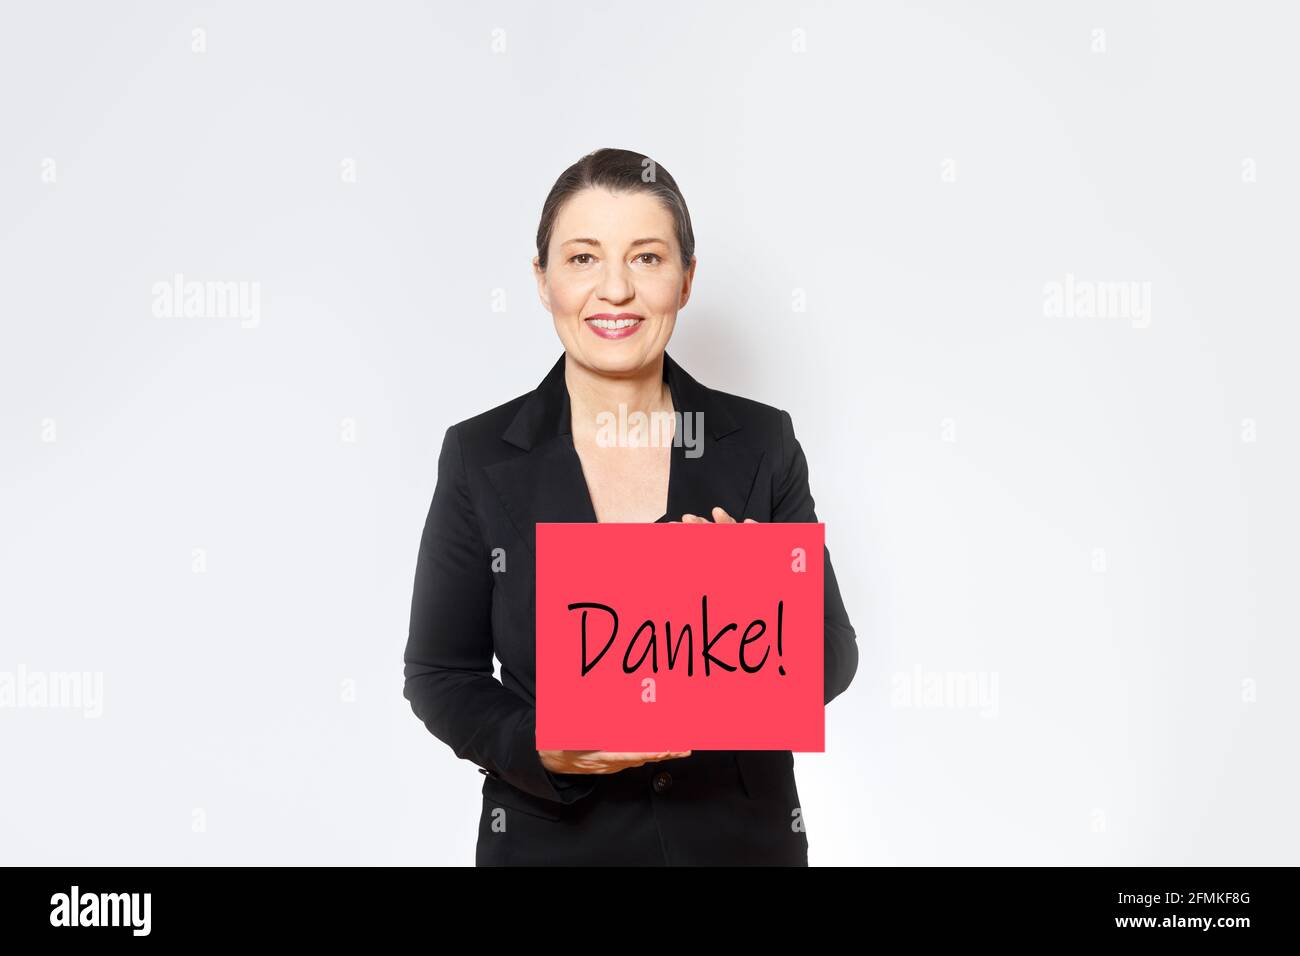 Smiling middle aged woman in black blazer holding up a red sign with the german text thank you, copy space. Stock Photo